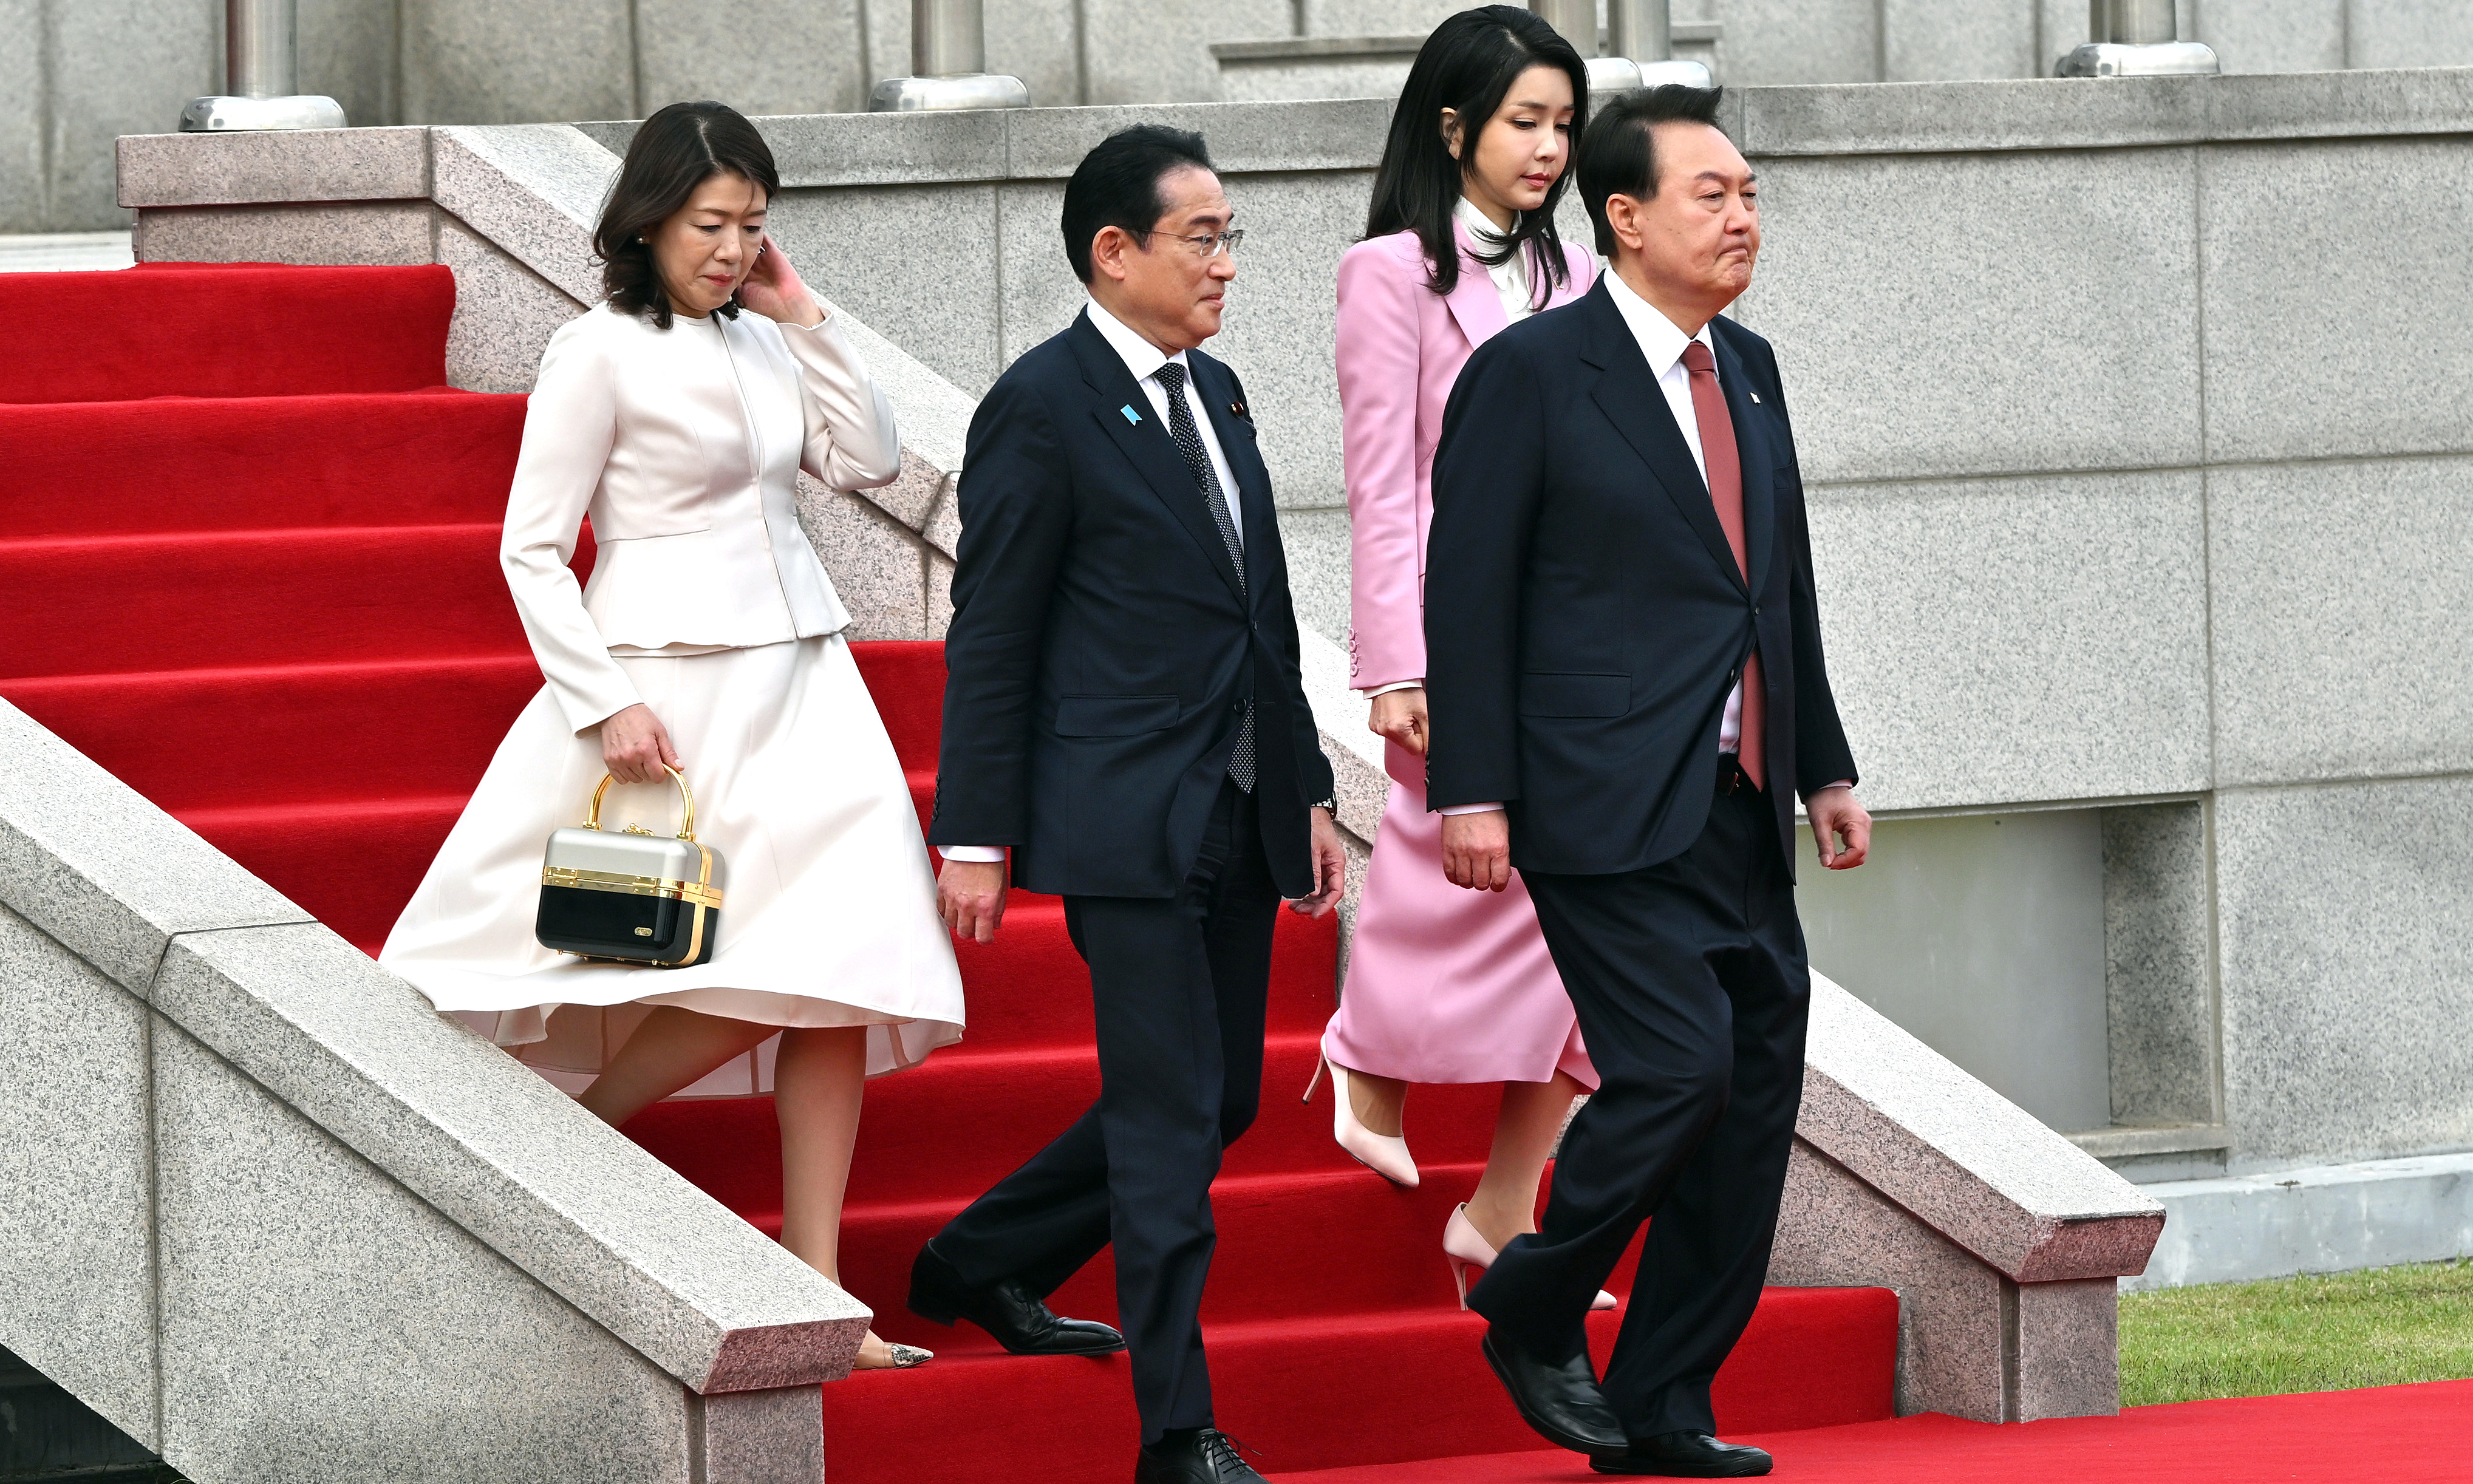 SEOUL: South Korean President Yoon Suk Yeol (right) and his wife Kim Keon-hee (second right) receive Japanese Prime Minister Fumio Kishida (second left) and his wife Yuko Kishida (left) during a welcoming ceremony at the presidential office in Seoul on May 7, 2023. -- AFP